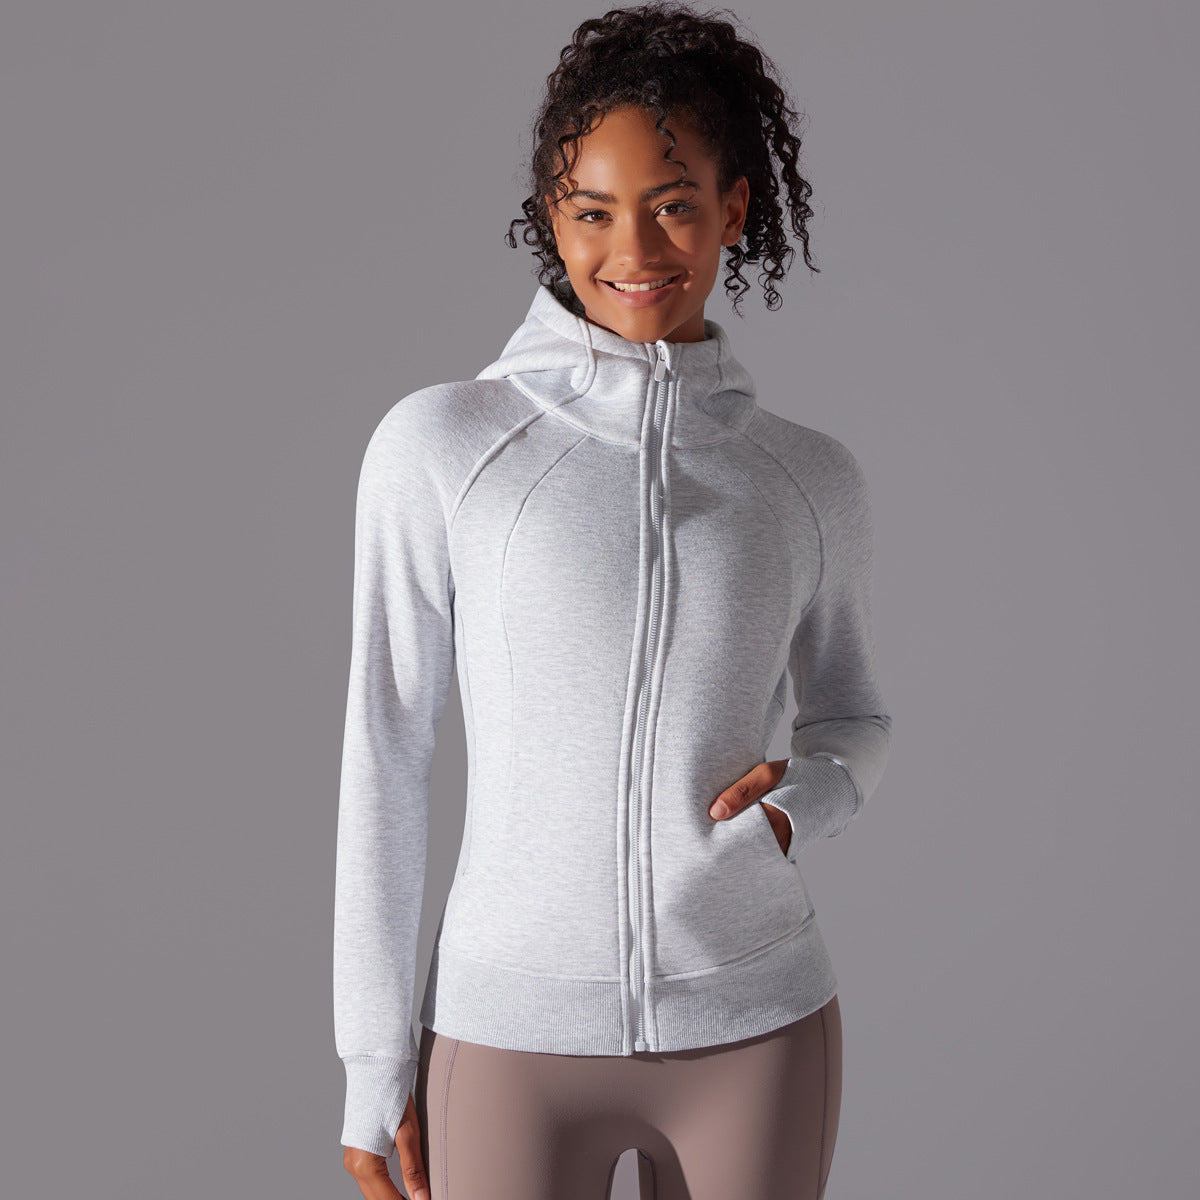 Thickened Warm Hooded Sports Jacket Spring Outdoor Casual Outdoor Yoga Training Running Fitness Jacket